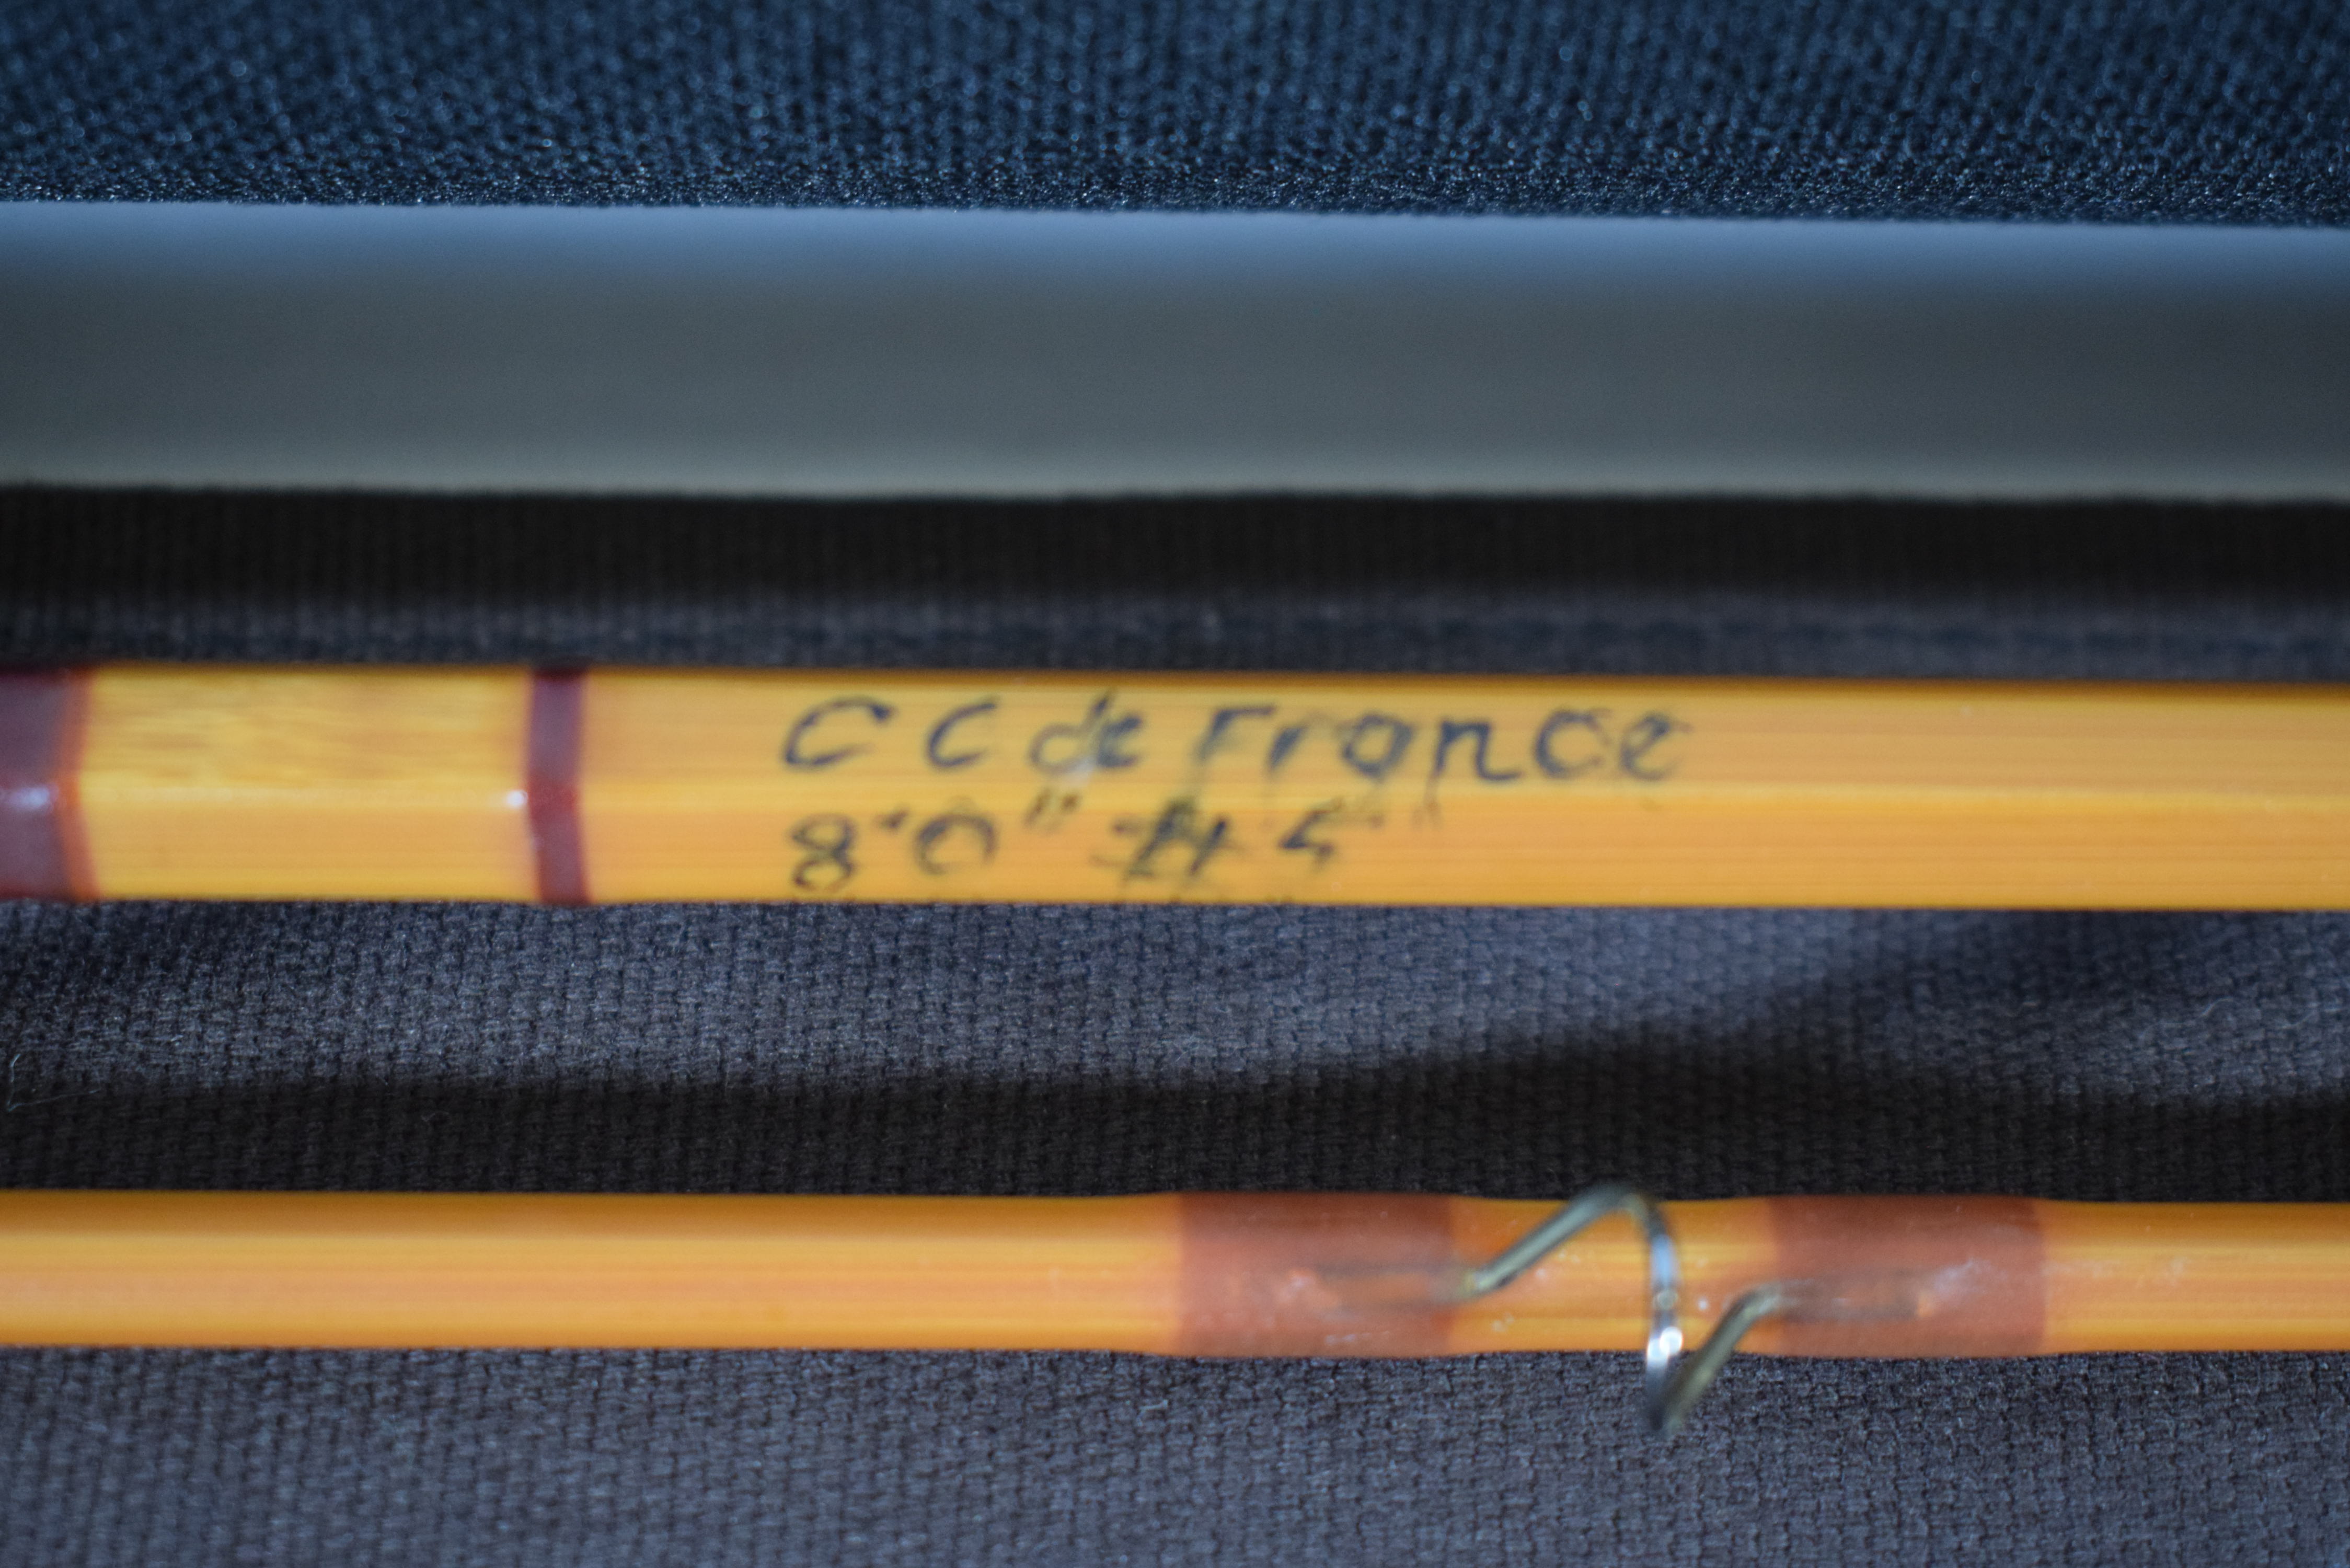 Custom Made Split cane two piece 8ft rod by CC of France. Comes with soft and hard case. See photos. - Image 2 of 3